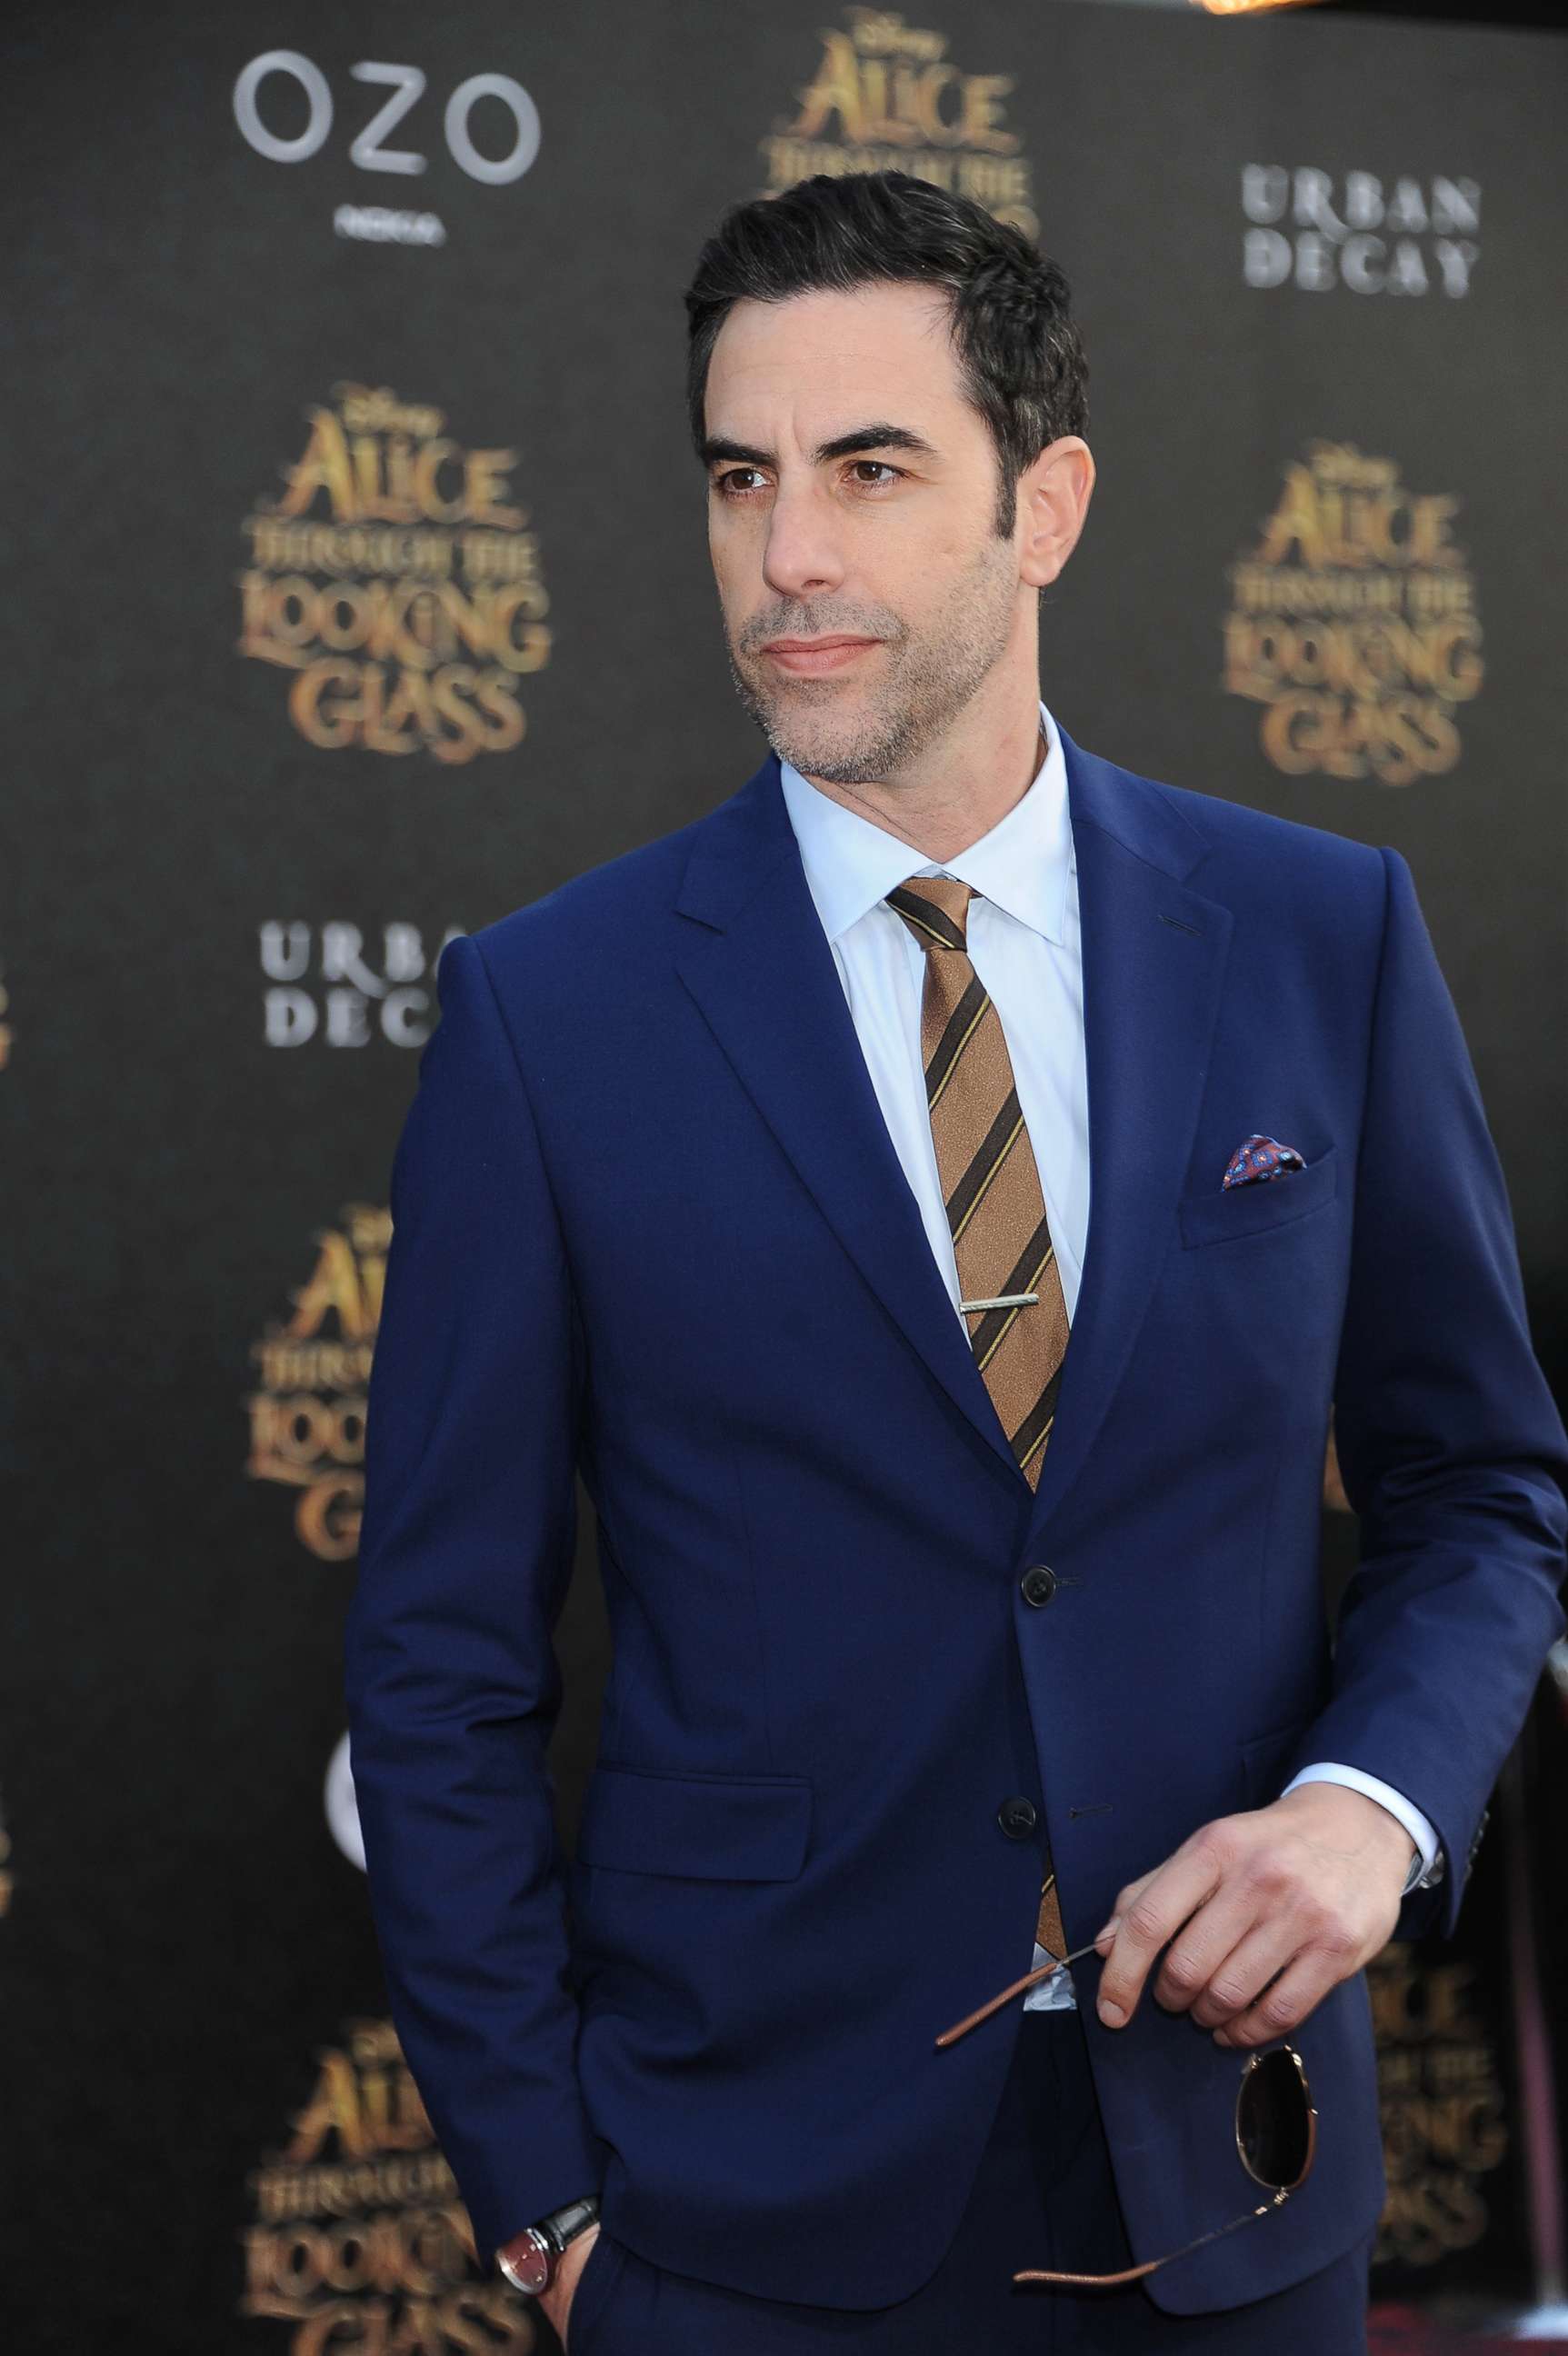 PHOTO: Sacha Baron Cohen attends the premiere of Disney's 'Alice Through the Looking Glass' at  the El Capitan Theater on May 23, 2016 in Hollywood, Calif.